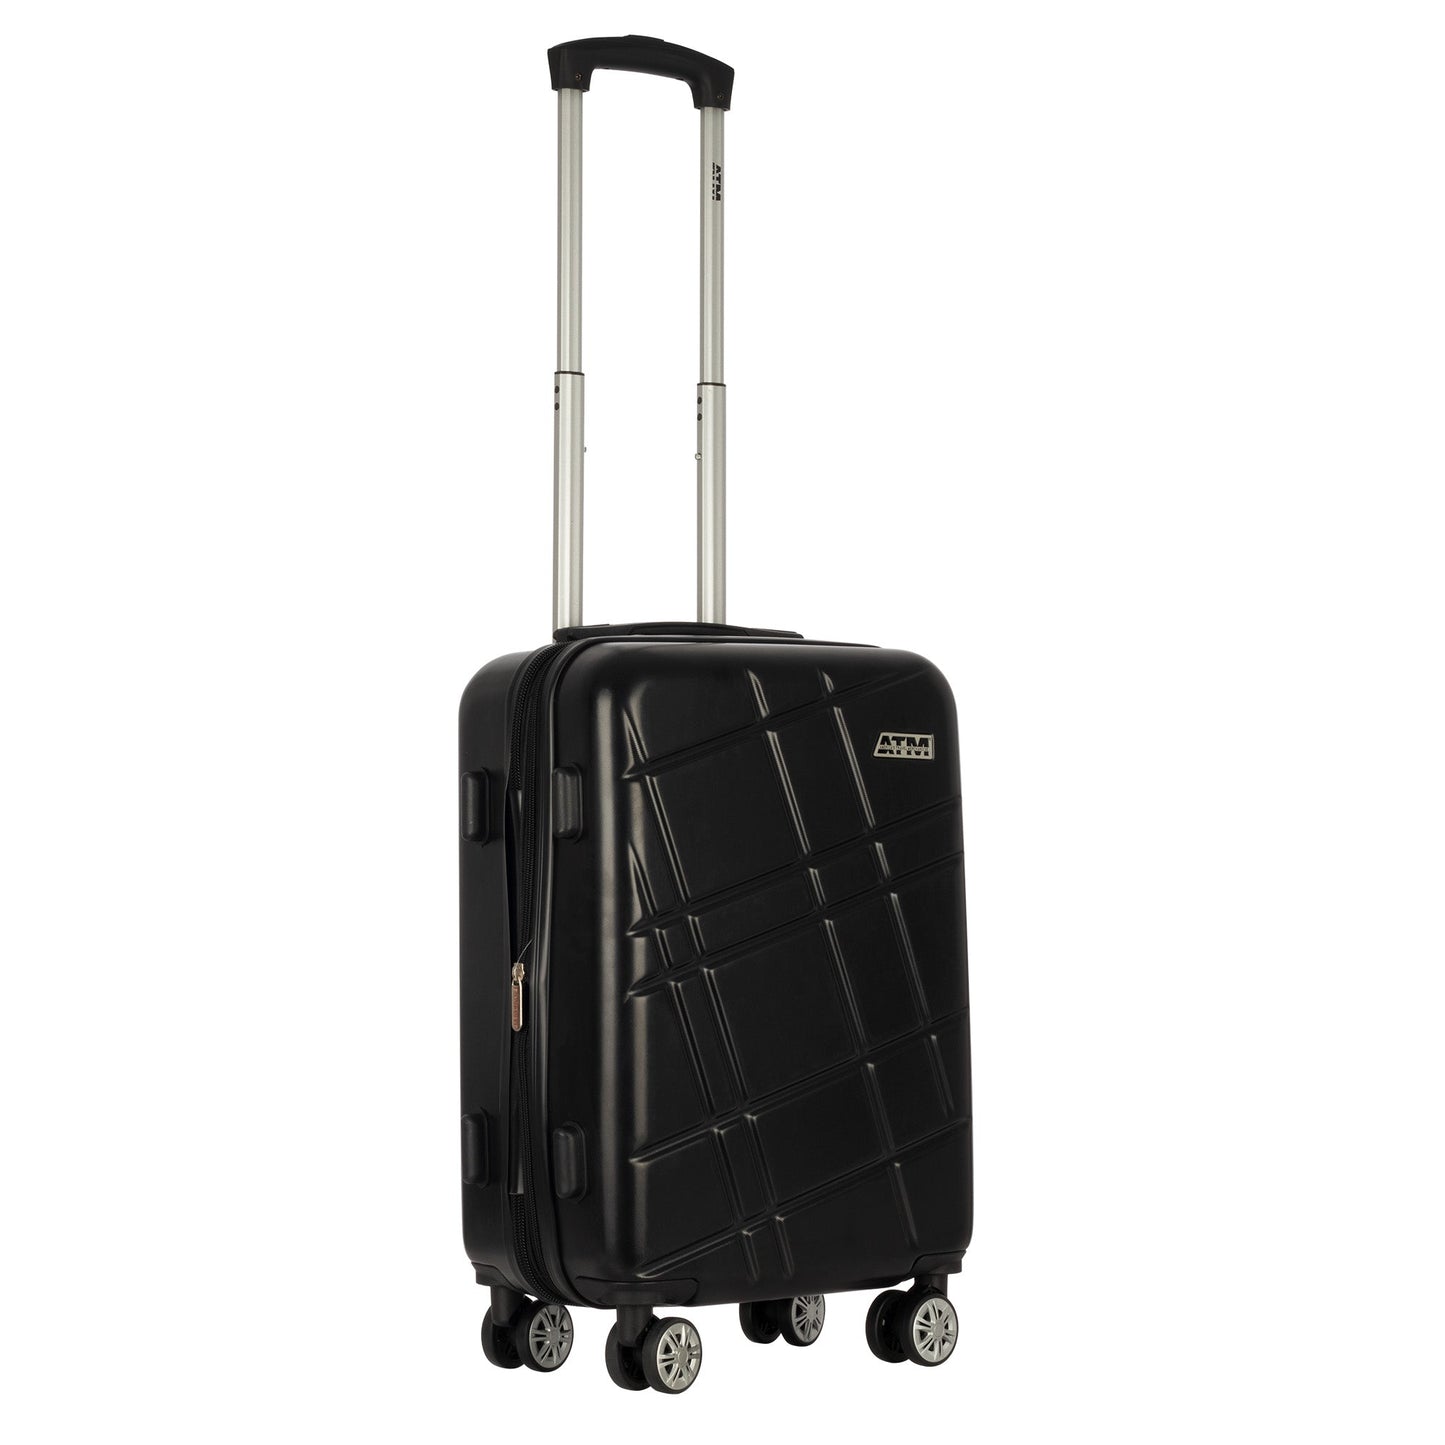 Soto collection luggage black (20") Suitcase Lock Spinner